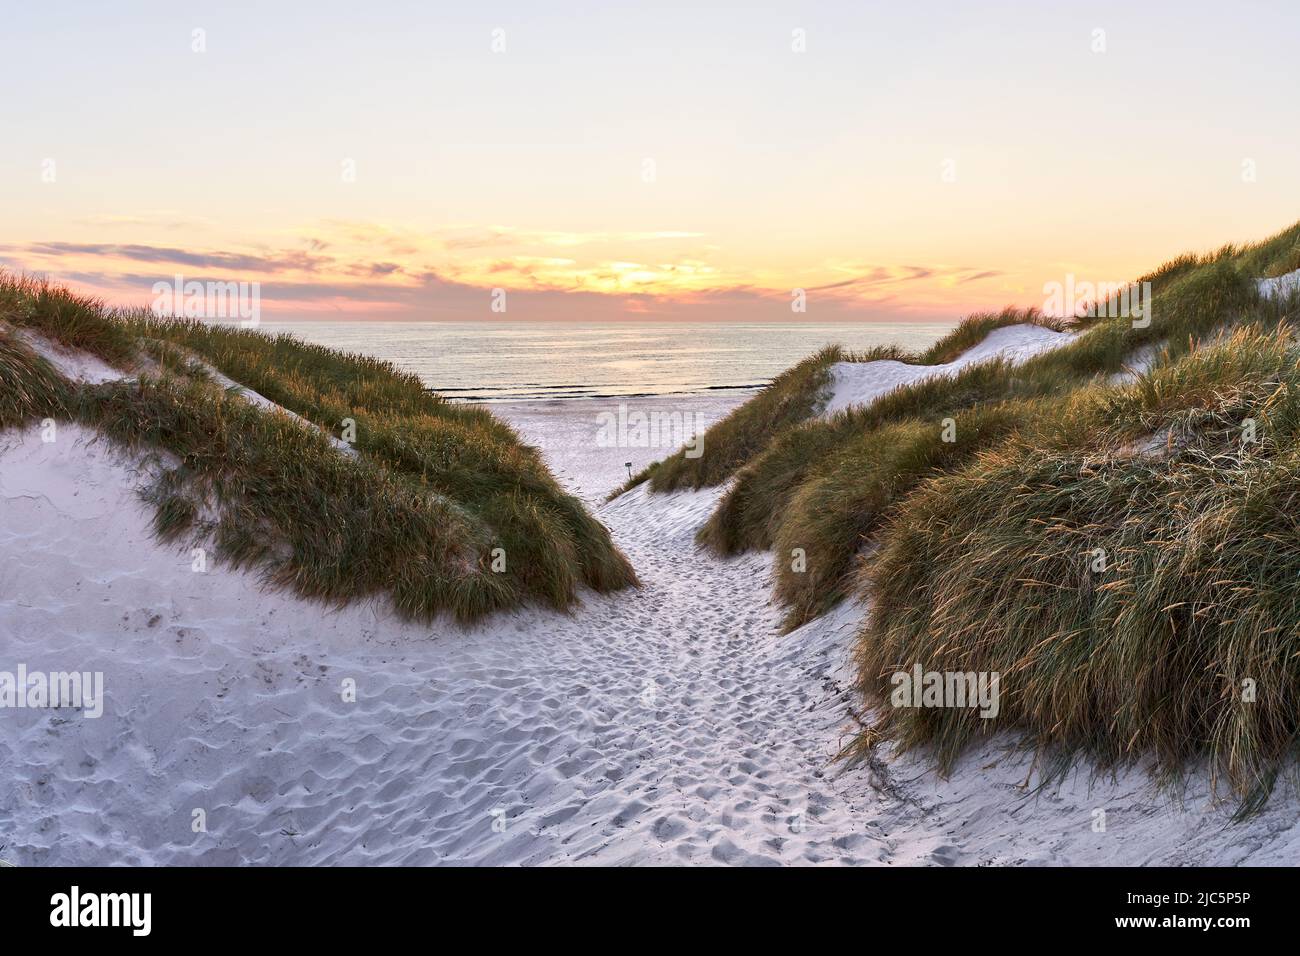 Sunset over the beach with dunes in the foreground in Denmark Stock Photo